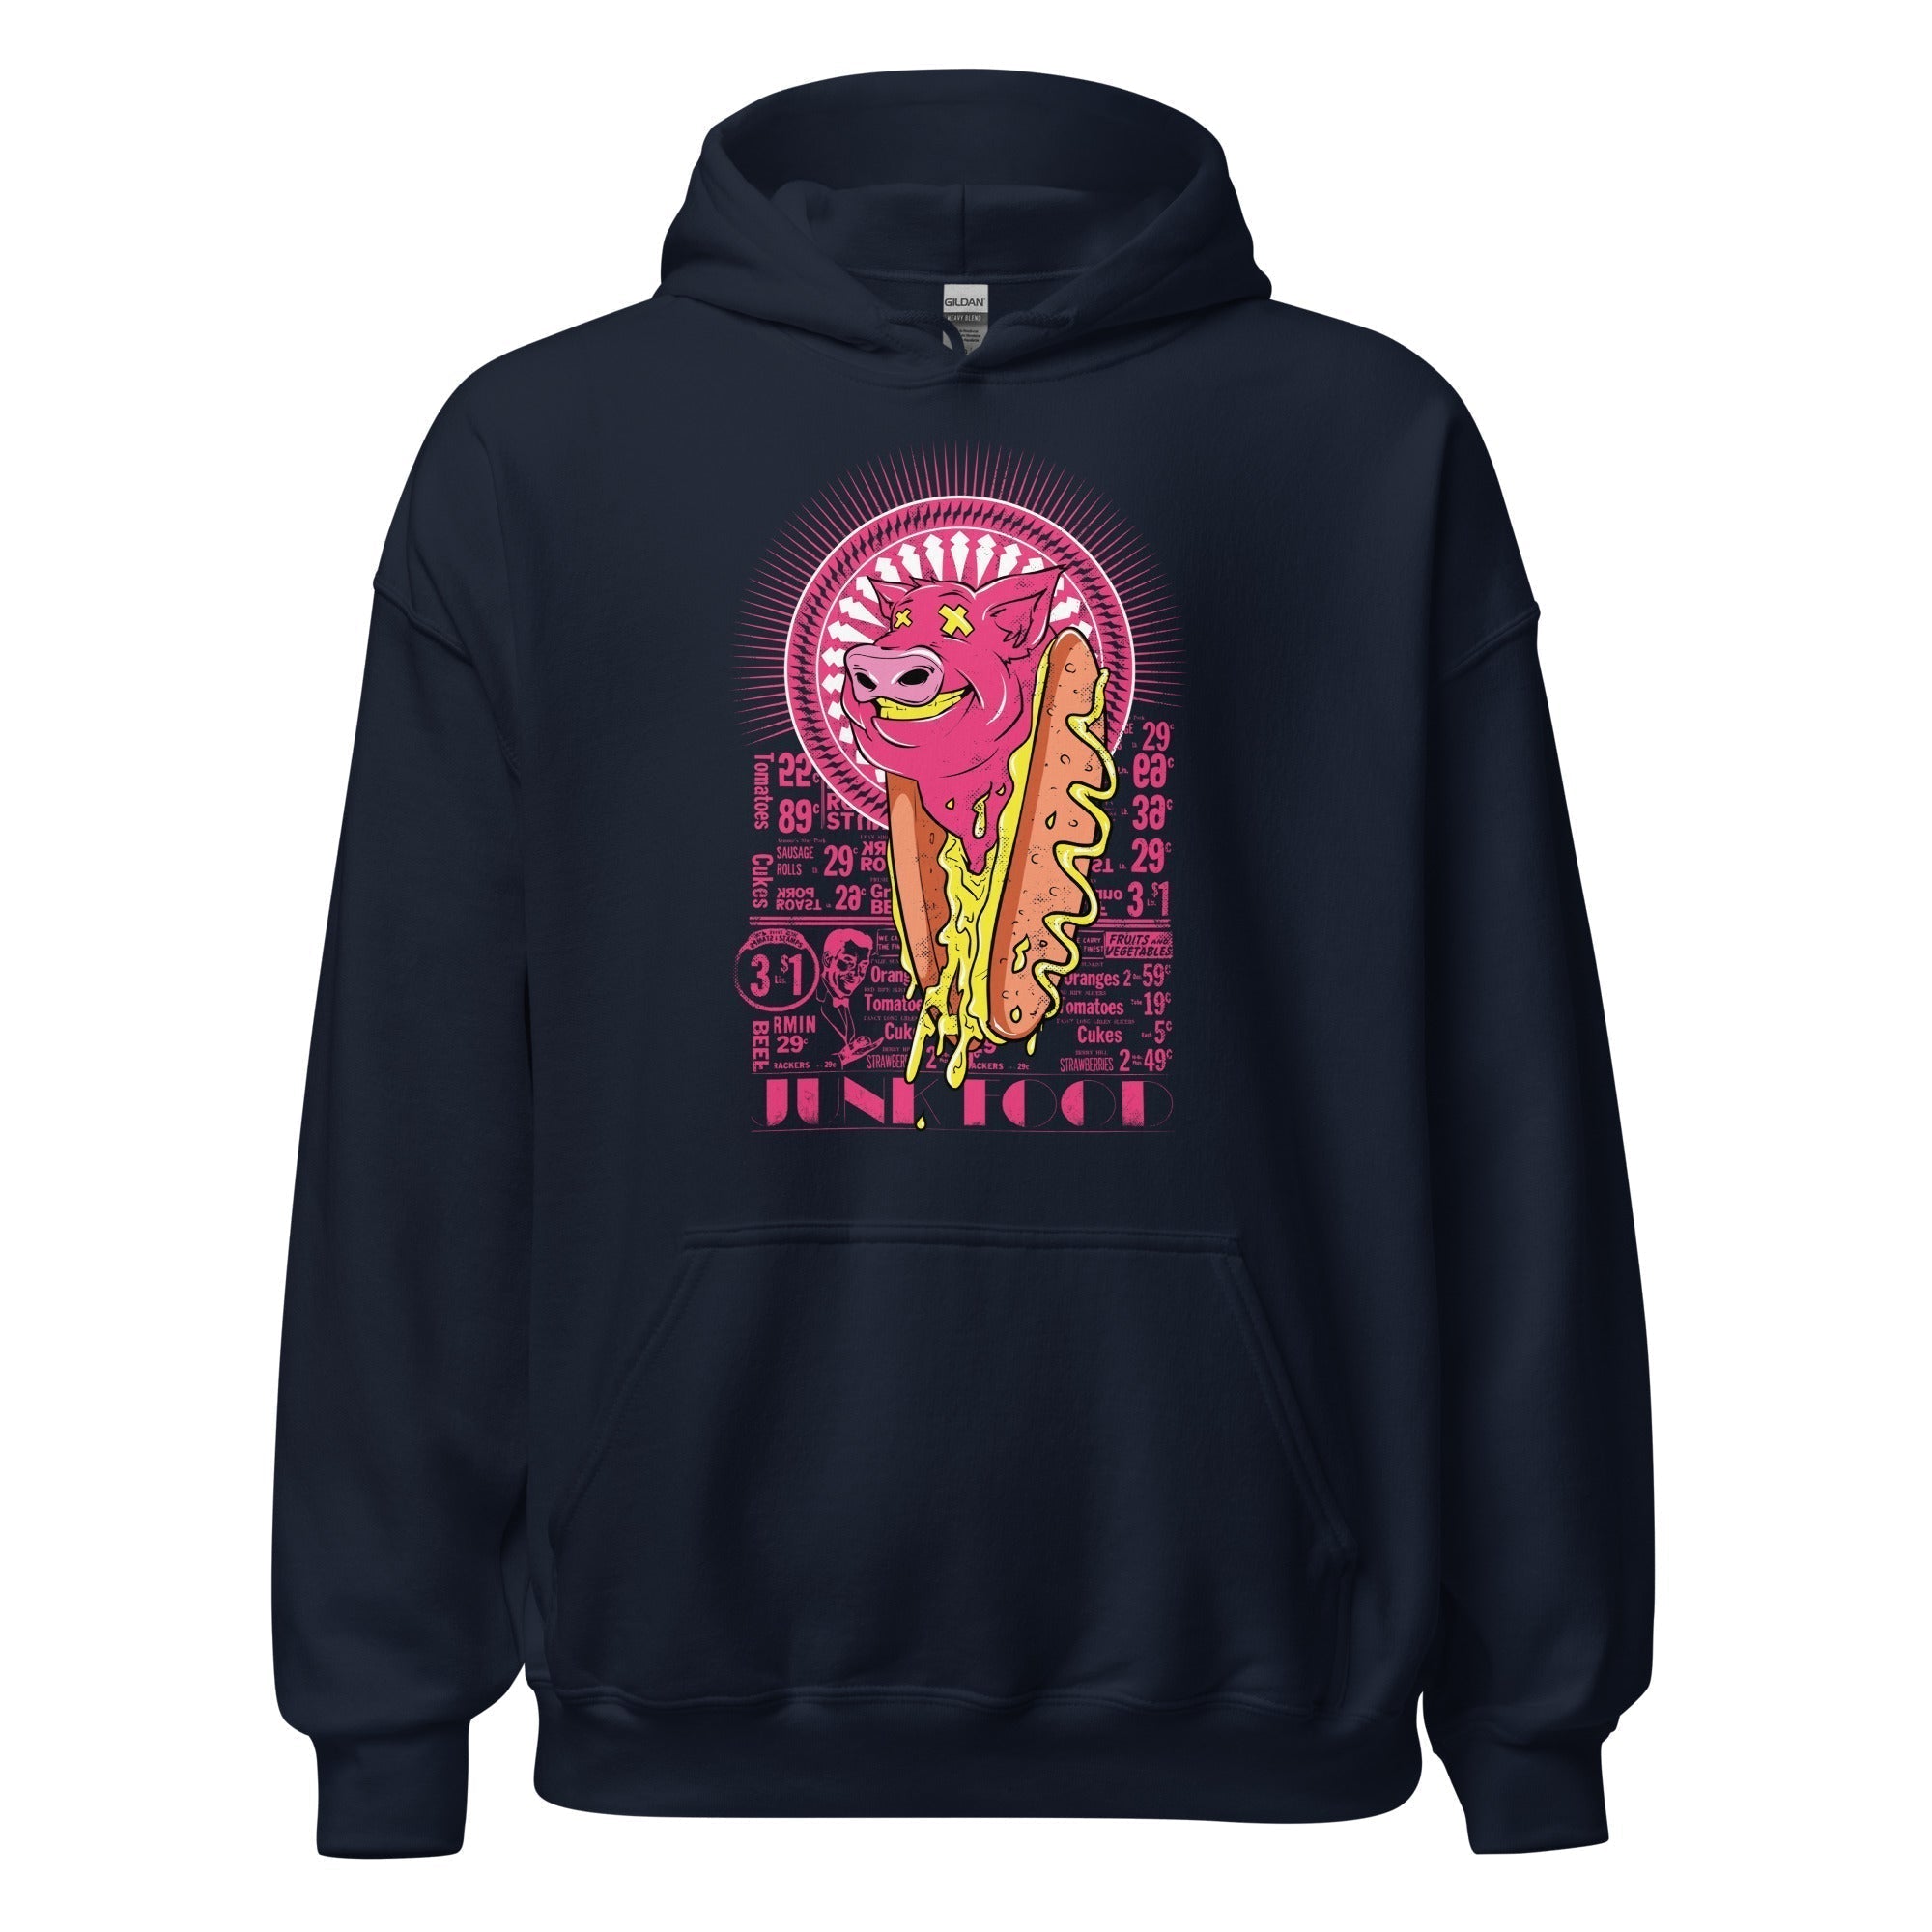 Unisex Heavy Blend Hoodie - Pink Hot Dogs - GRAPHIC T-SHIRTS